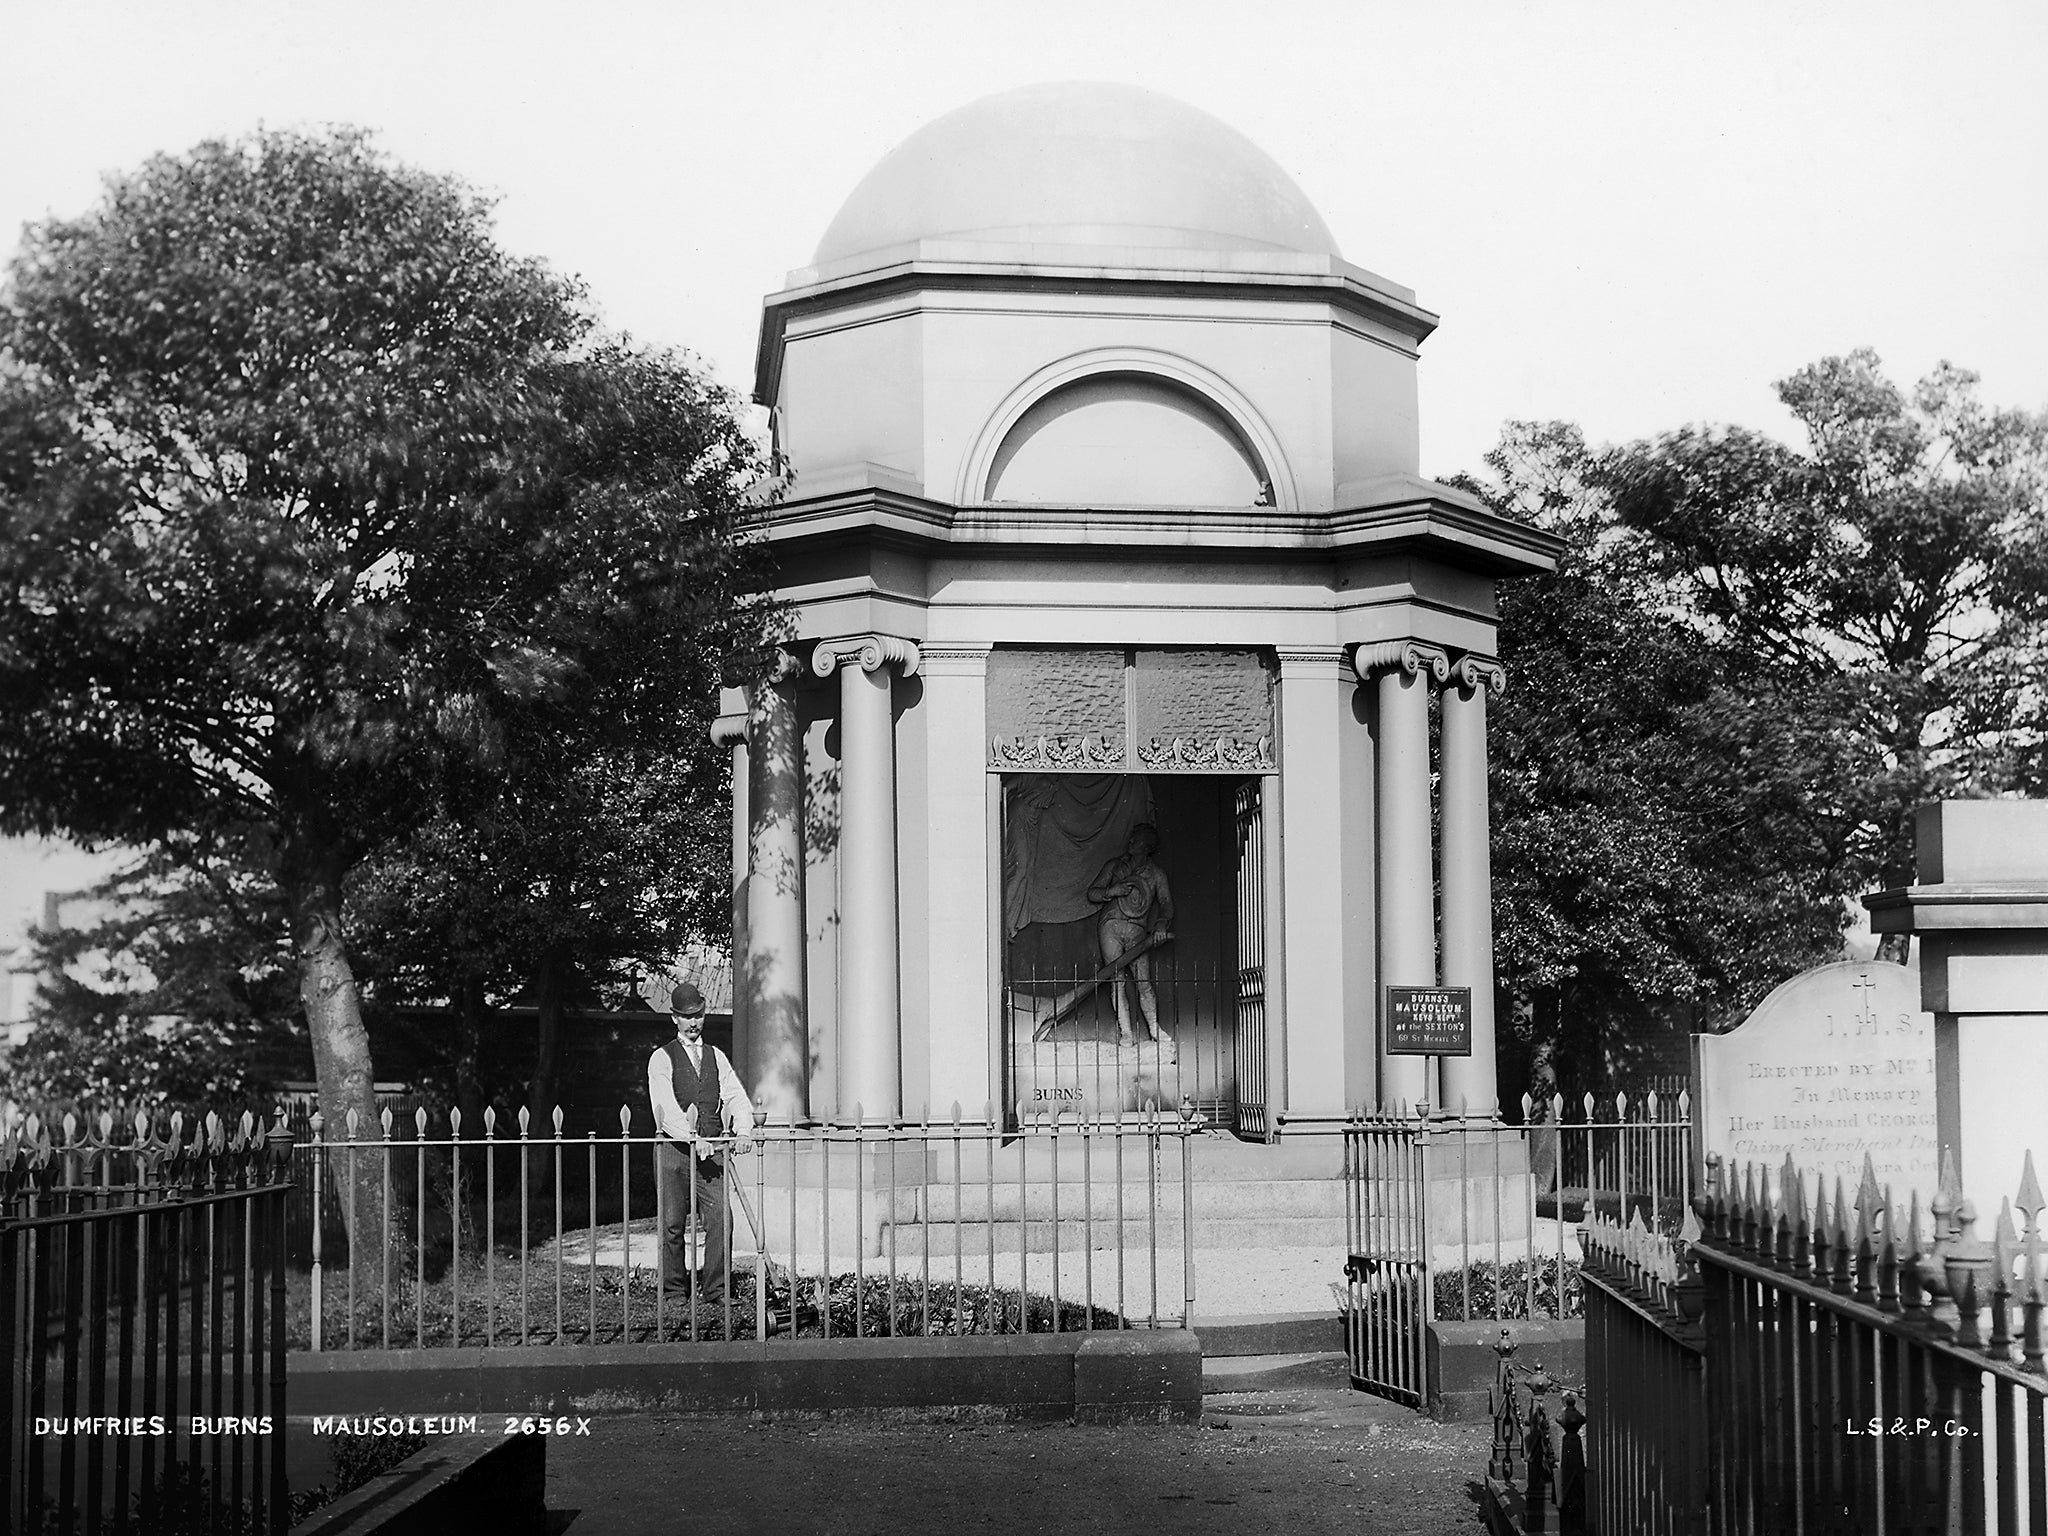 Robert Burns' mausoleum resting in St Michael's Churchyard in Dumfries, in the south-west of Scotland, circa 1900